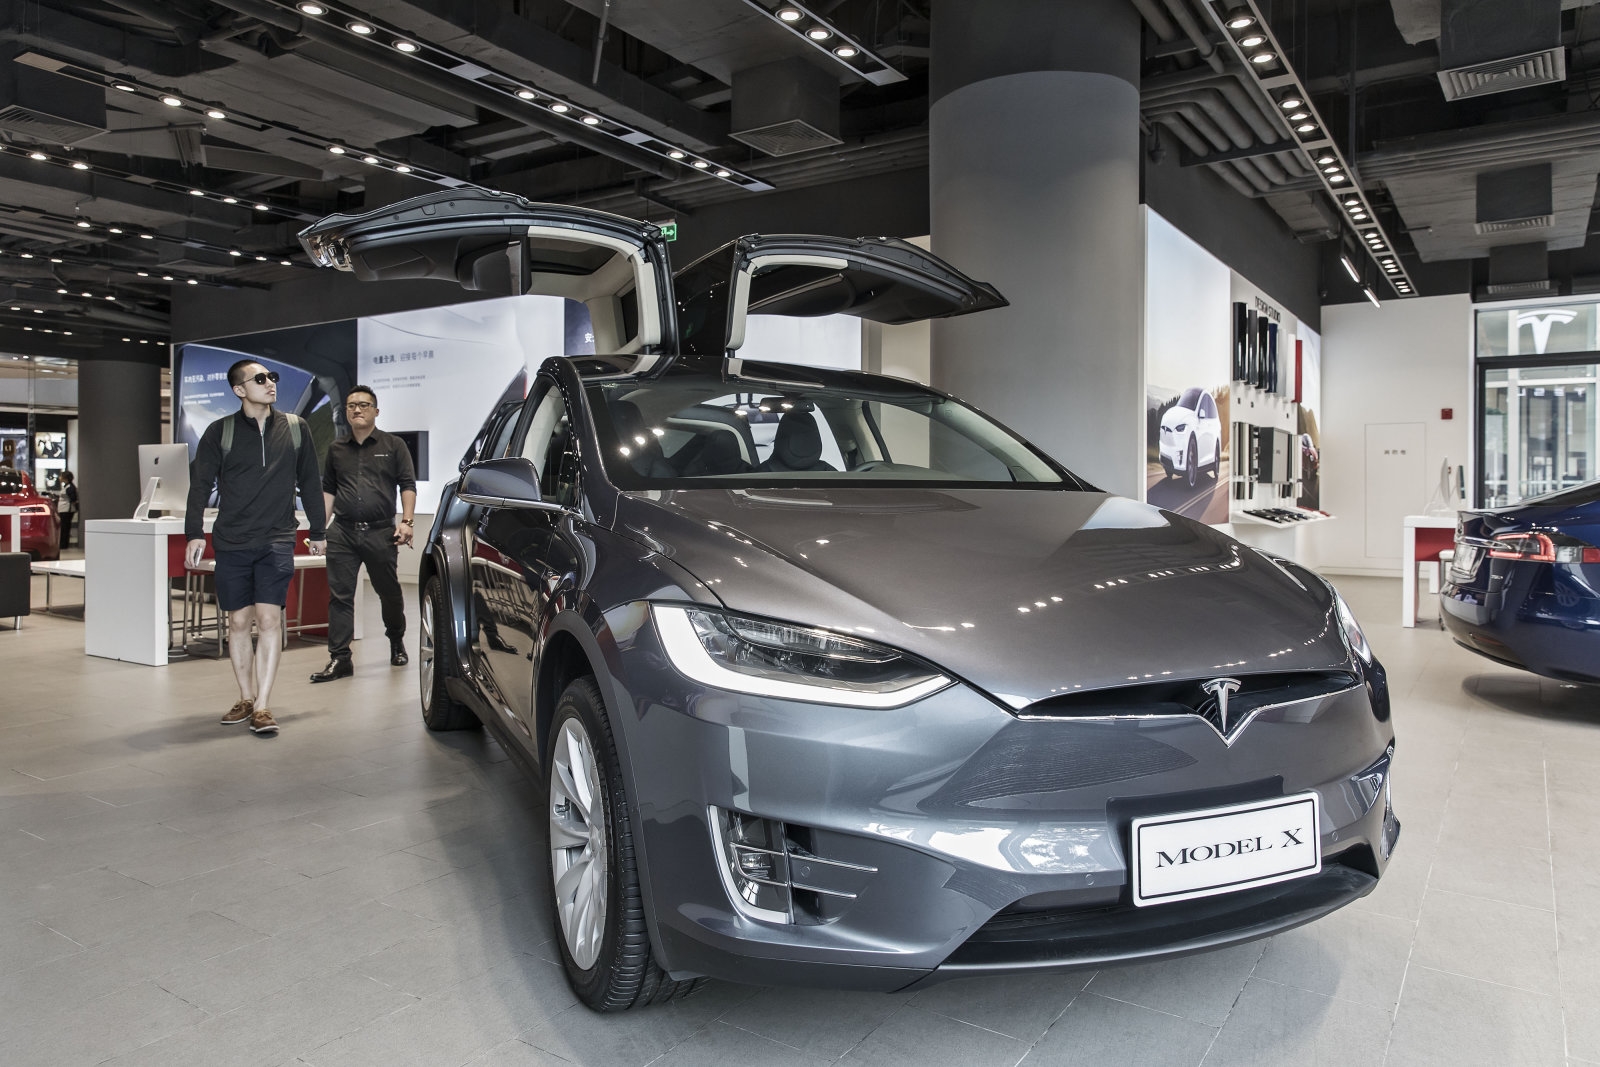 Tesla recalls 11,000 Model X SUVs for seat issues | DeviceDaily.com